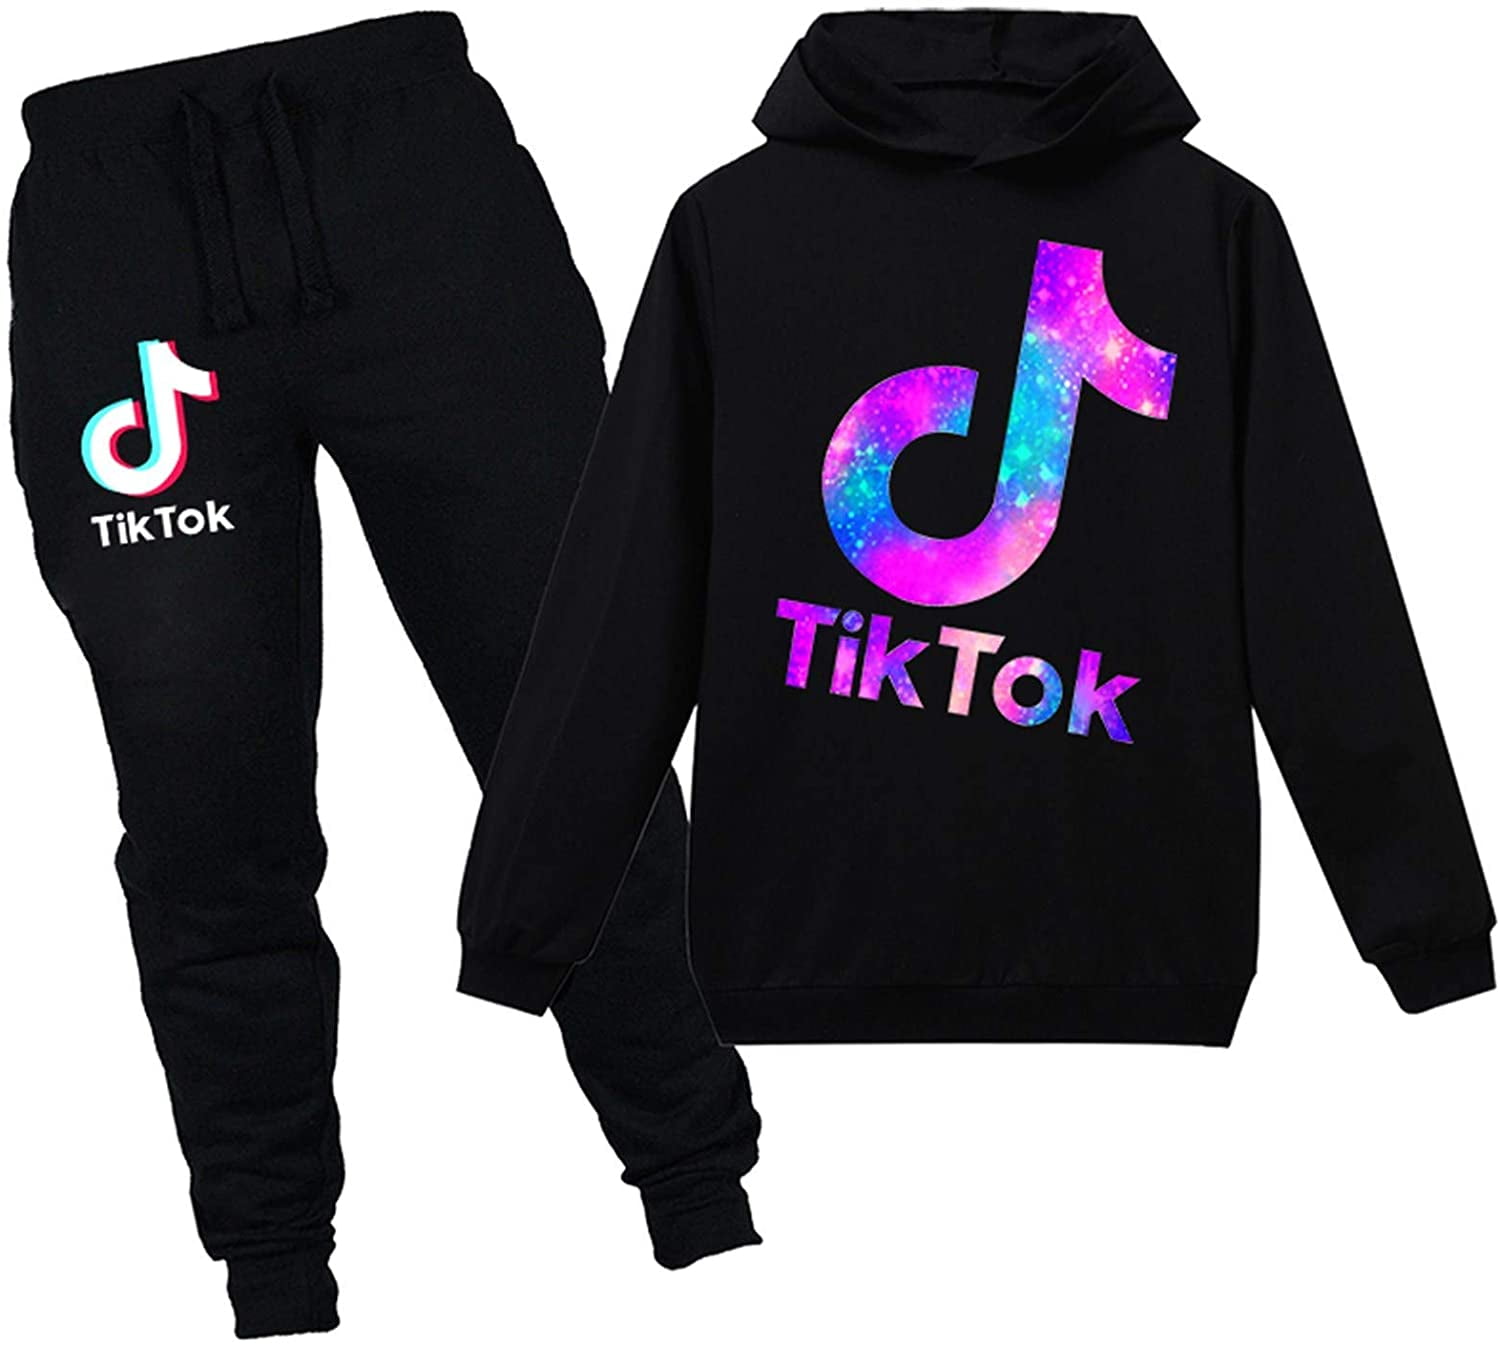 Boys Girls TIK-Tok Pullover Hoodie and Sweatpants Set for Kids 2 Piece Outfit Fashion Jogging Suits